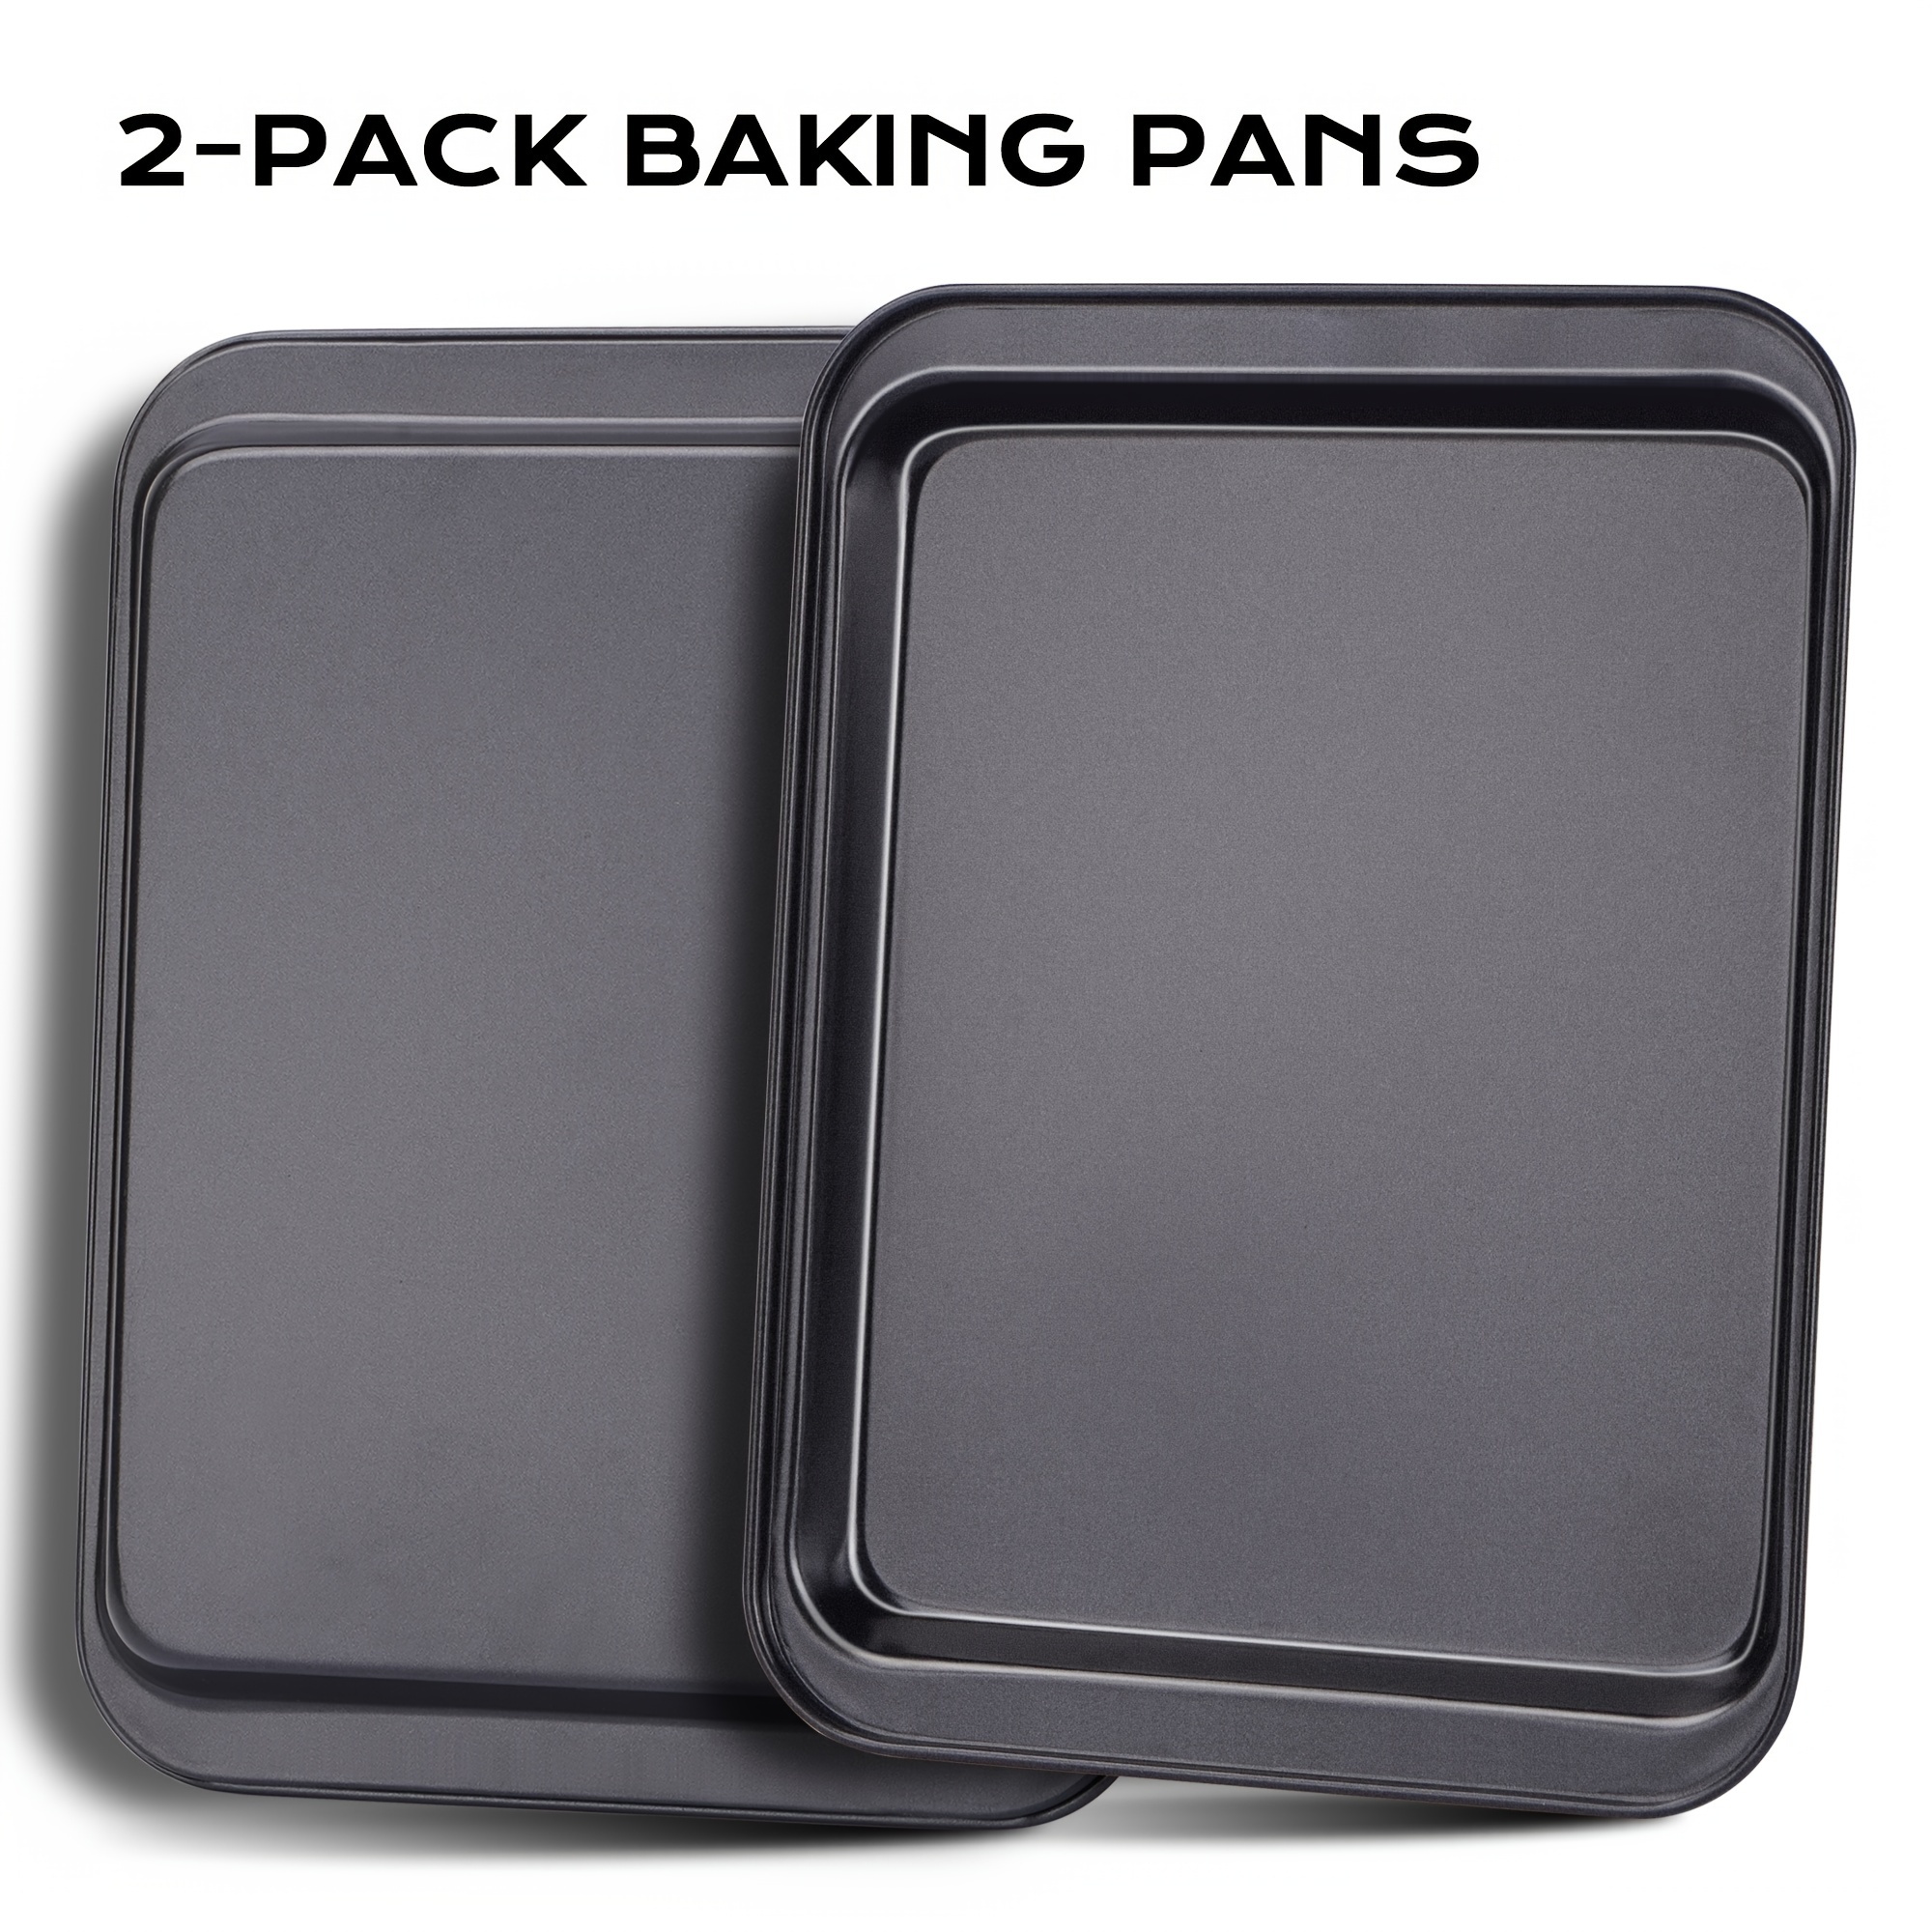 2pcs, Small Baking Sheets, Mini Cookie Sheet, Toaster Conventional Oven  Pan, Nonstick No Warp Magnetic Bakeware For 1 Or 2 Person, 9.45 X 7.09 Inch  (I